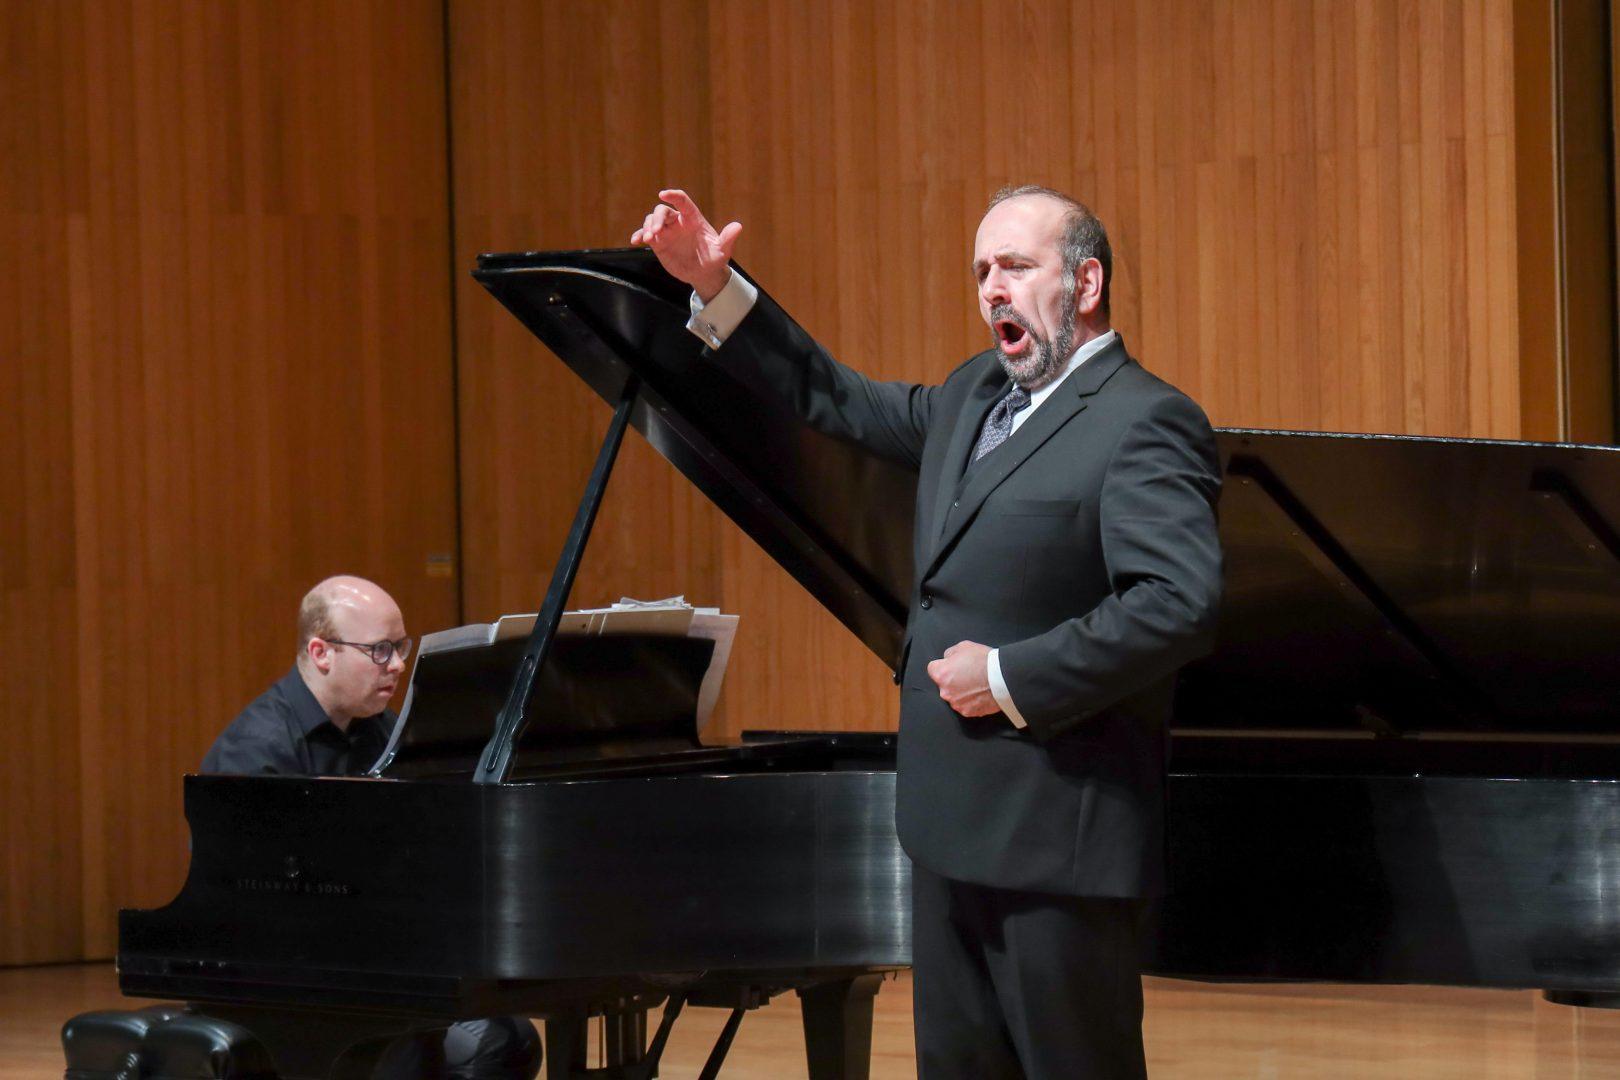 Russian dramatic baritone, Dr. Anton Belov, performs opera with collaborative pianist Drew Quiring for Fresno State’s third annual Art Song Festival at the Concert Hall on Feb. 29, 2020.
By: Breanna Hardy